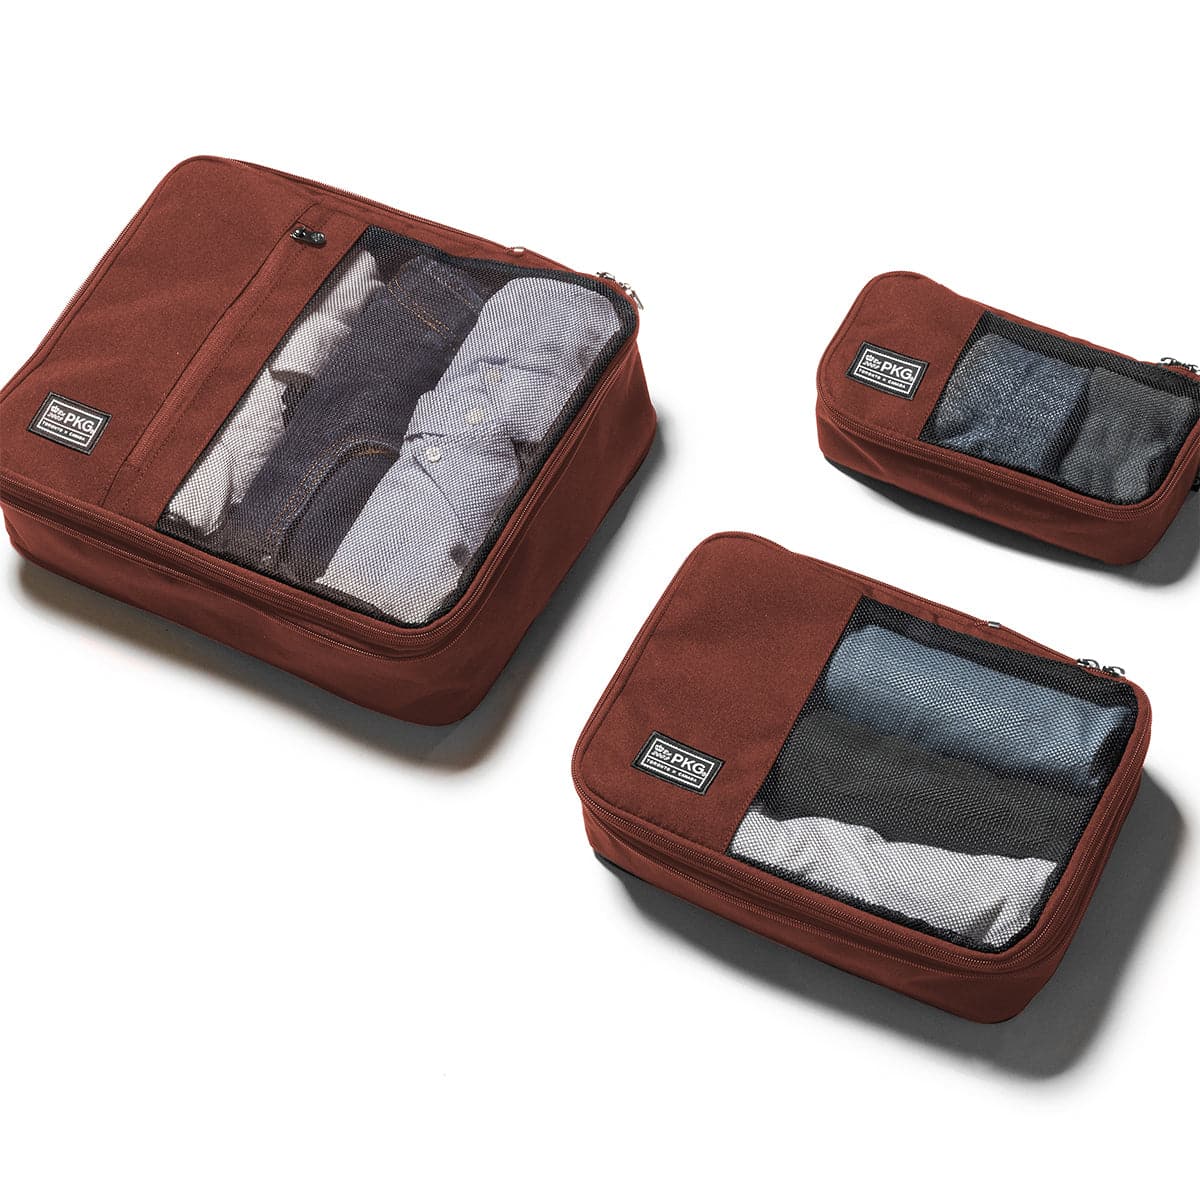 PKG Union Recycled Compression Packing Cubes - 3 Pack